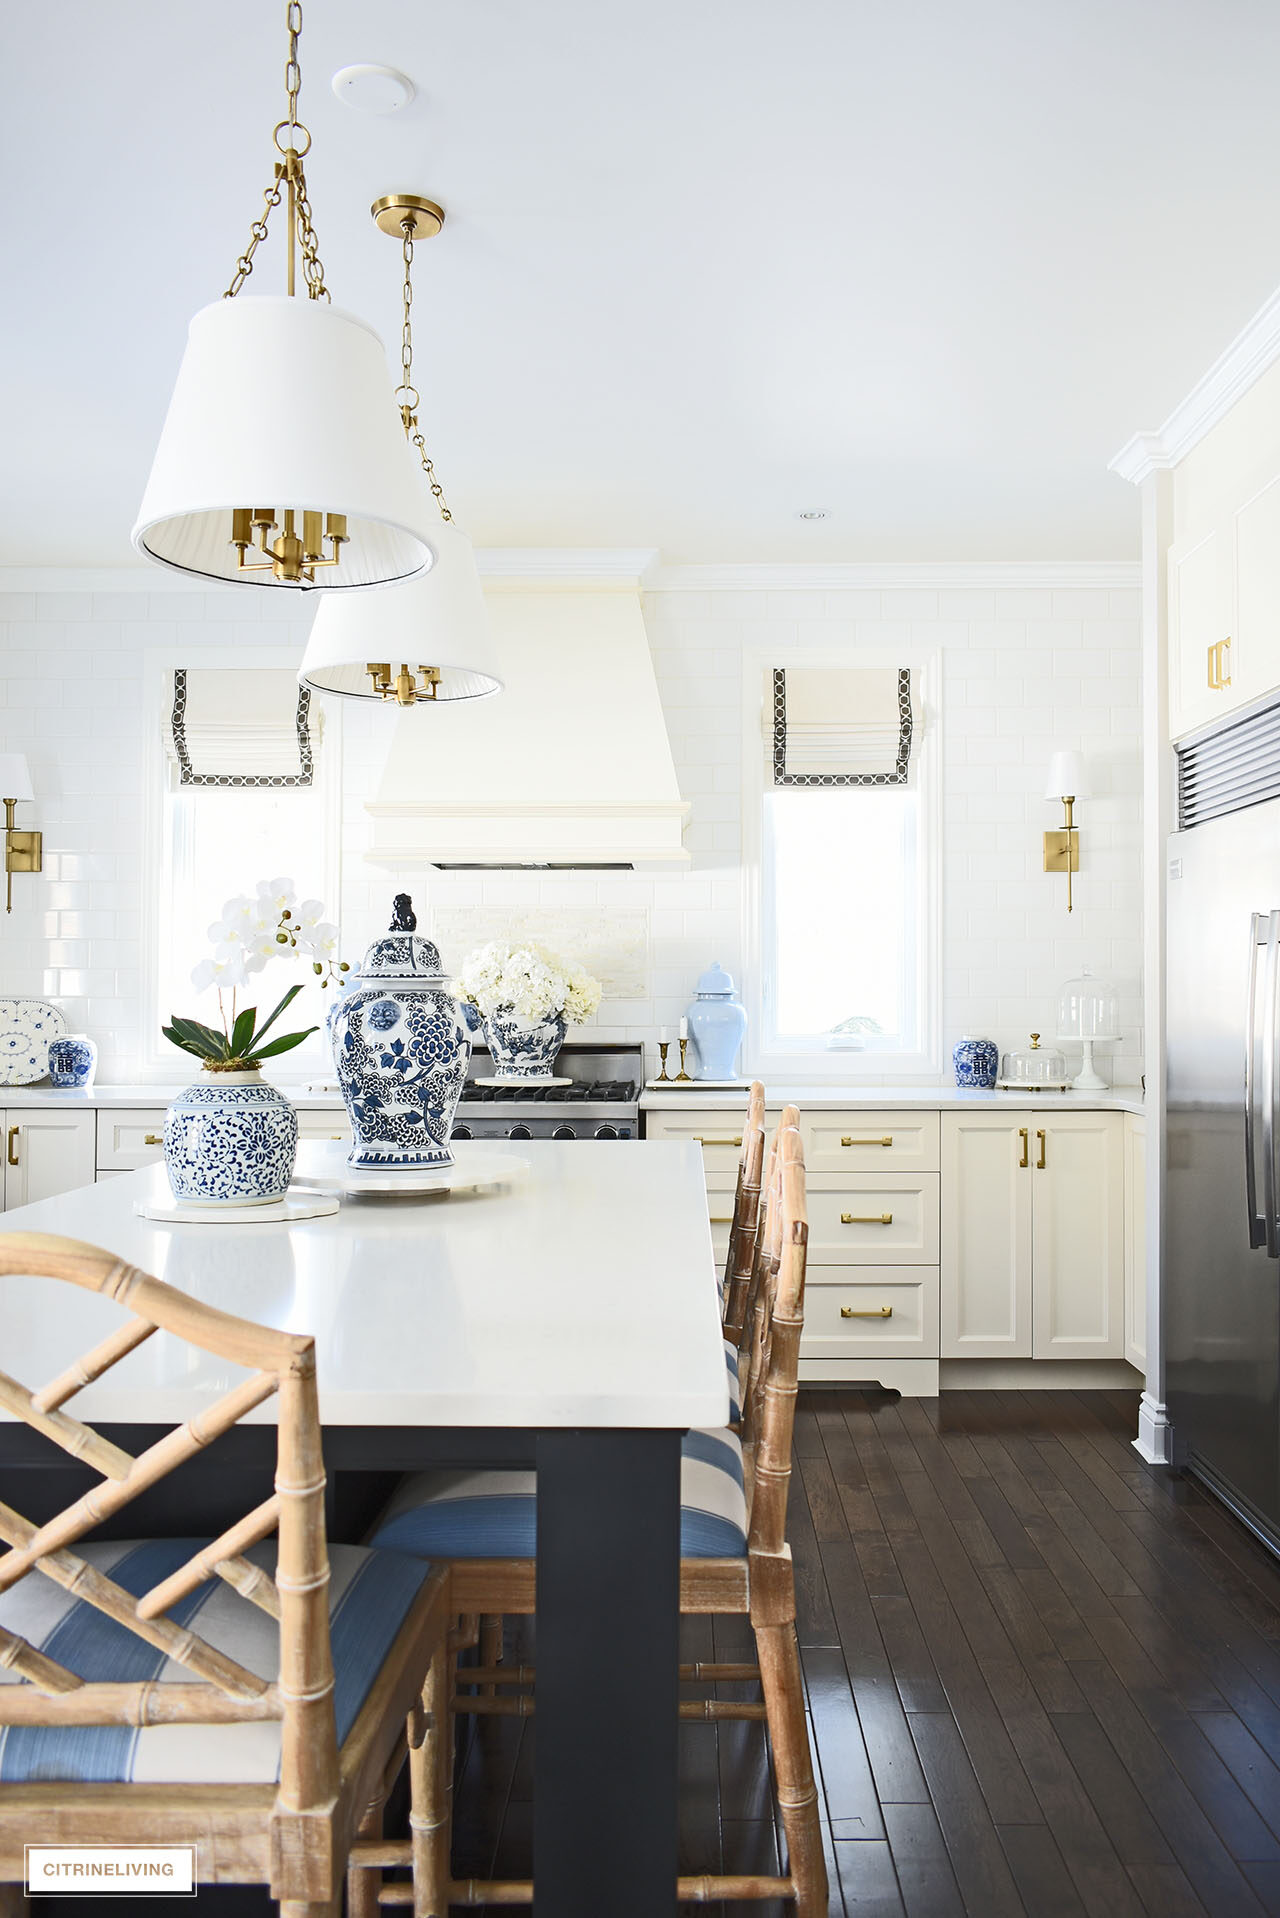 White kitchen decorated for spring with simple touches in blue and white, orchids, hydrangeas and ginger jars.